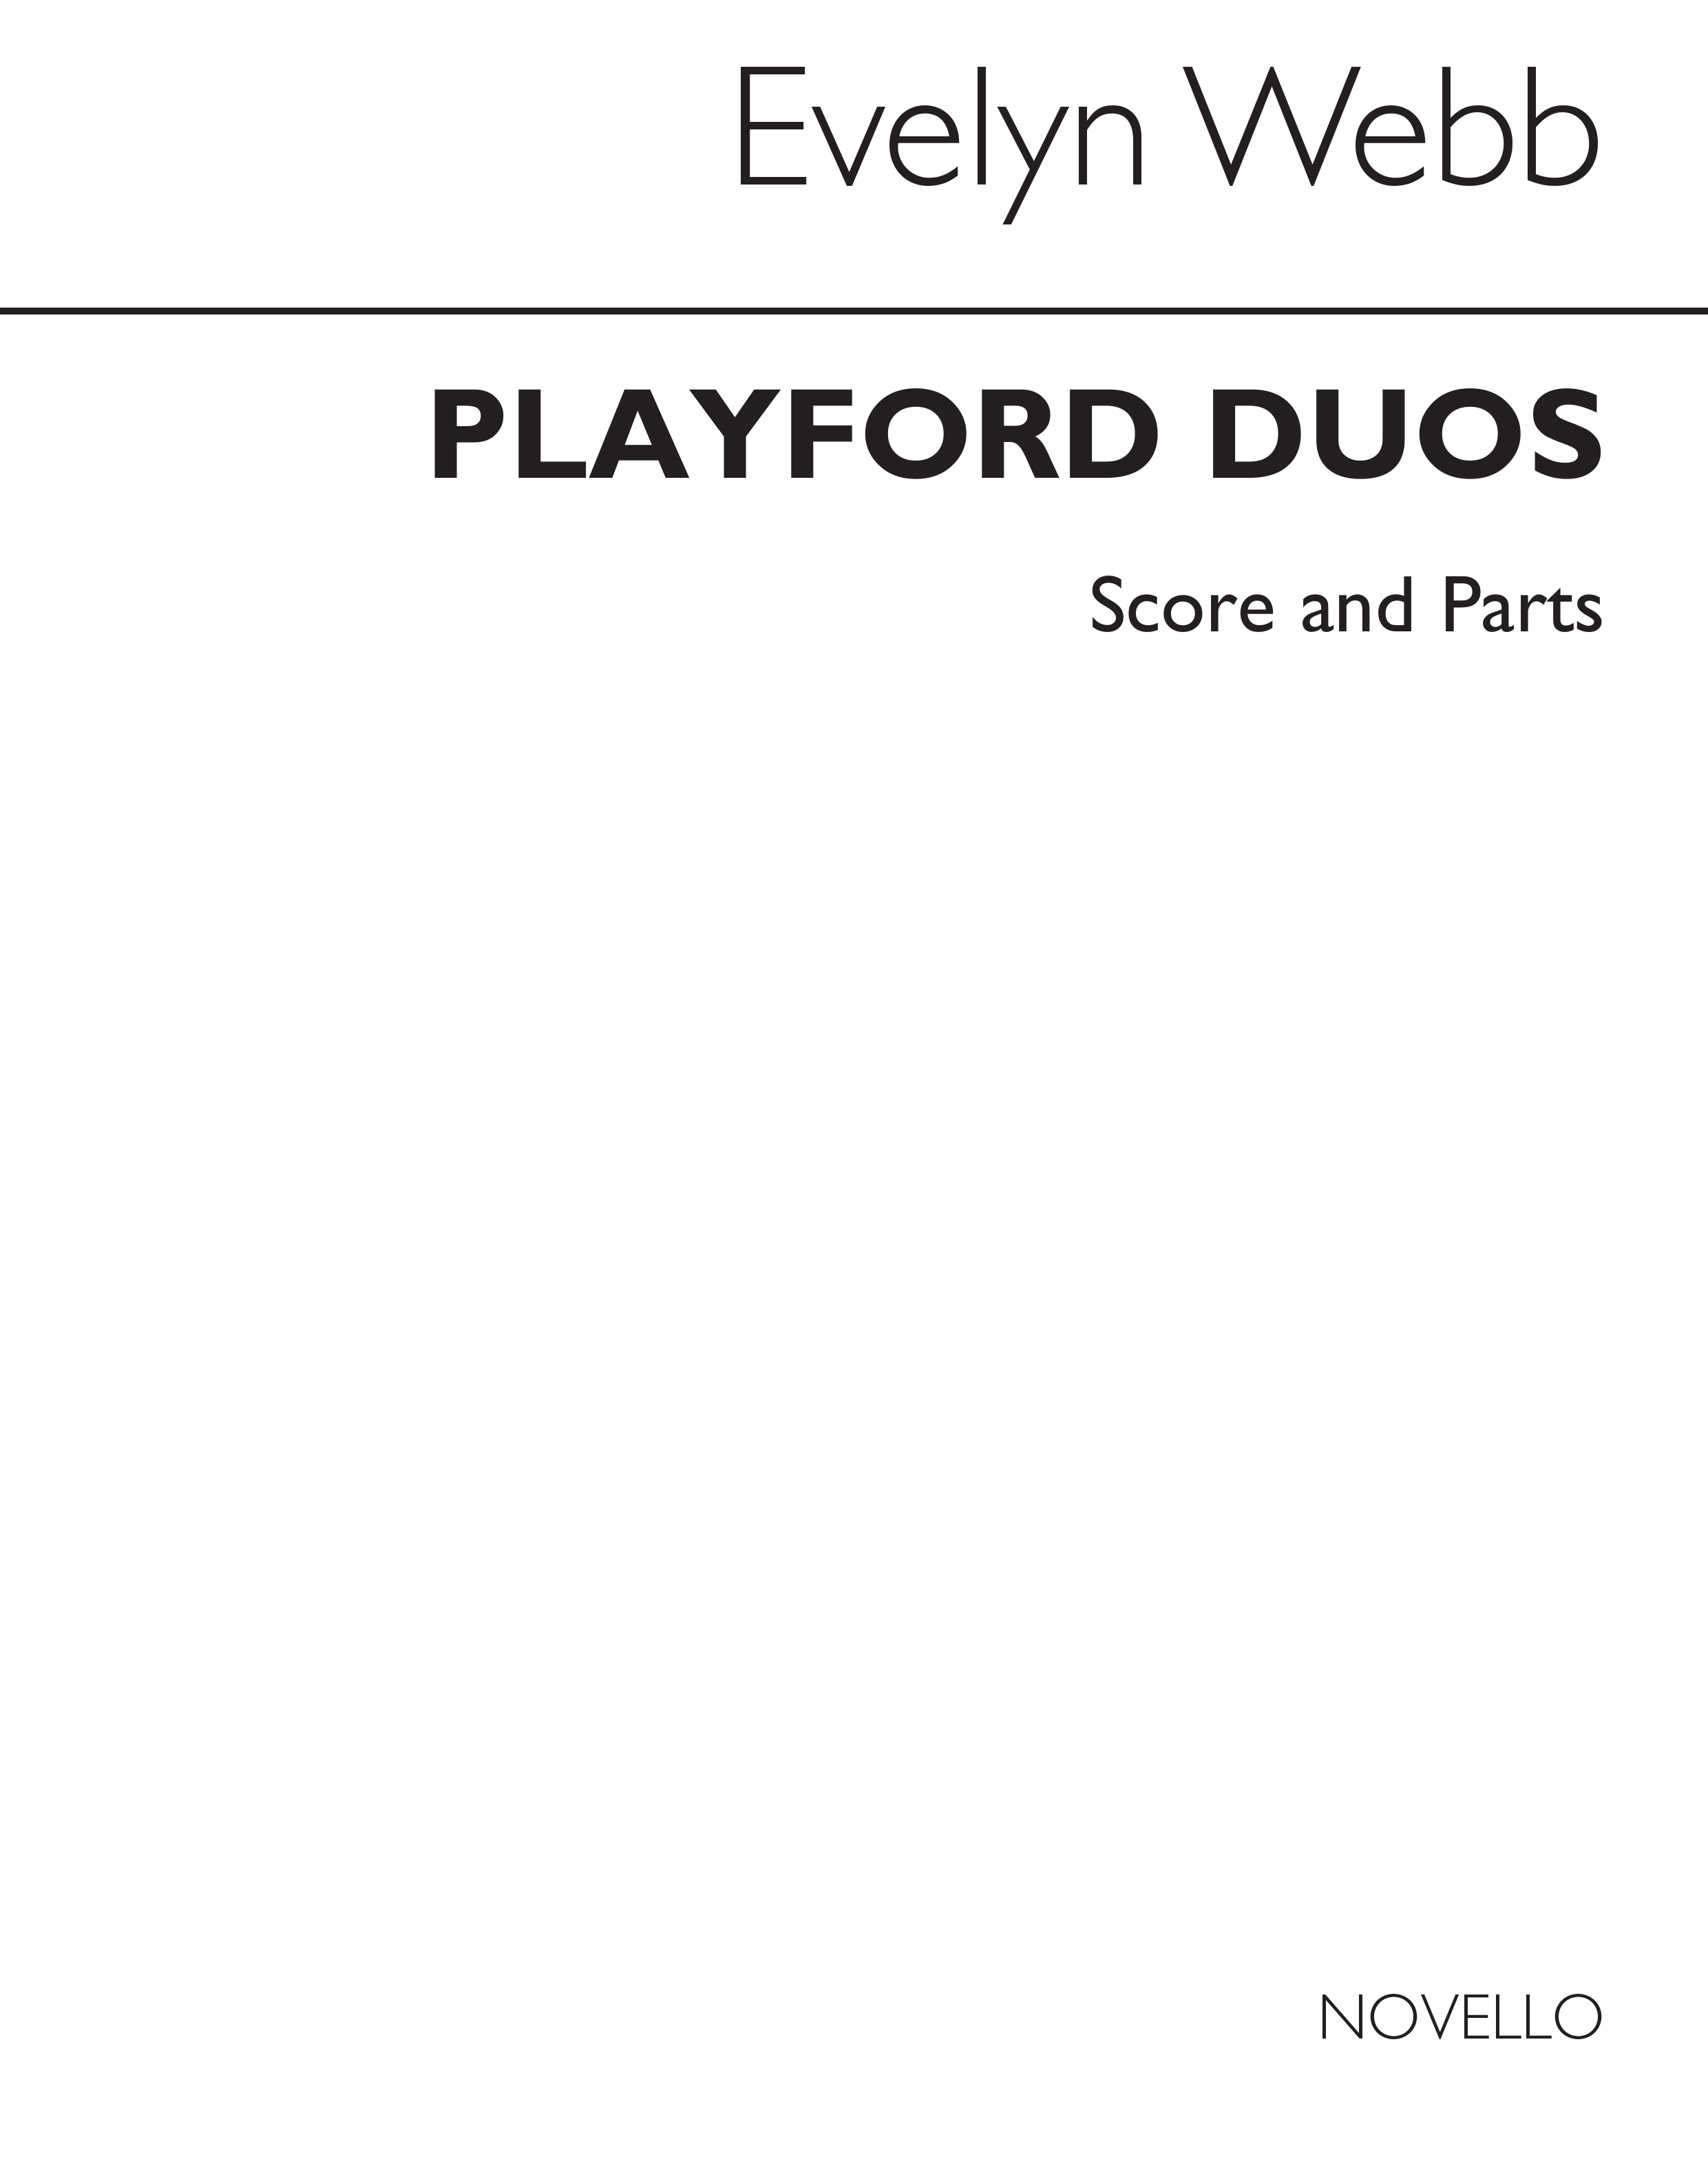 Evelyn Webb: Playford Duos (Score and Parts)